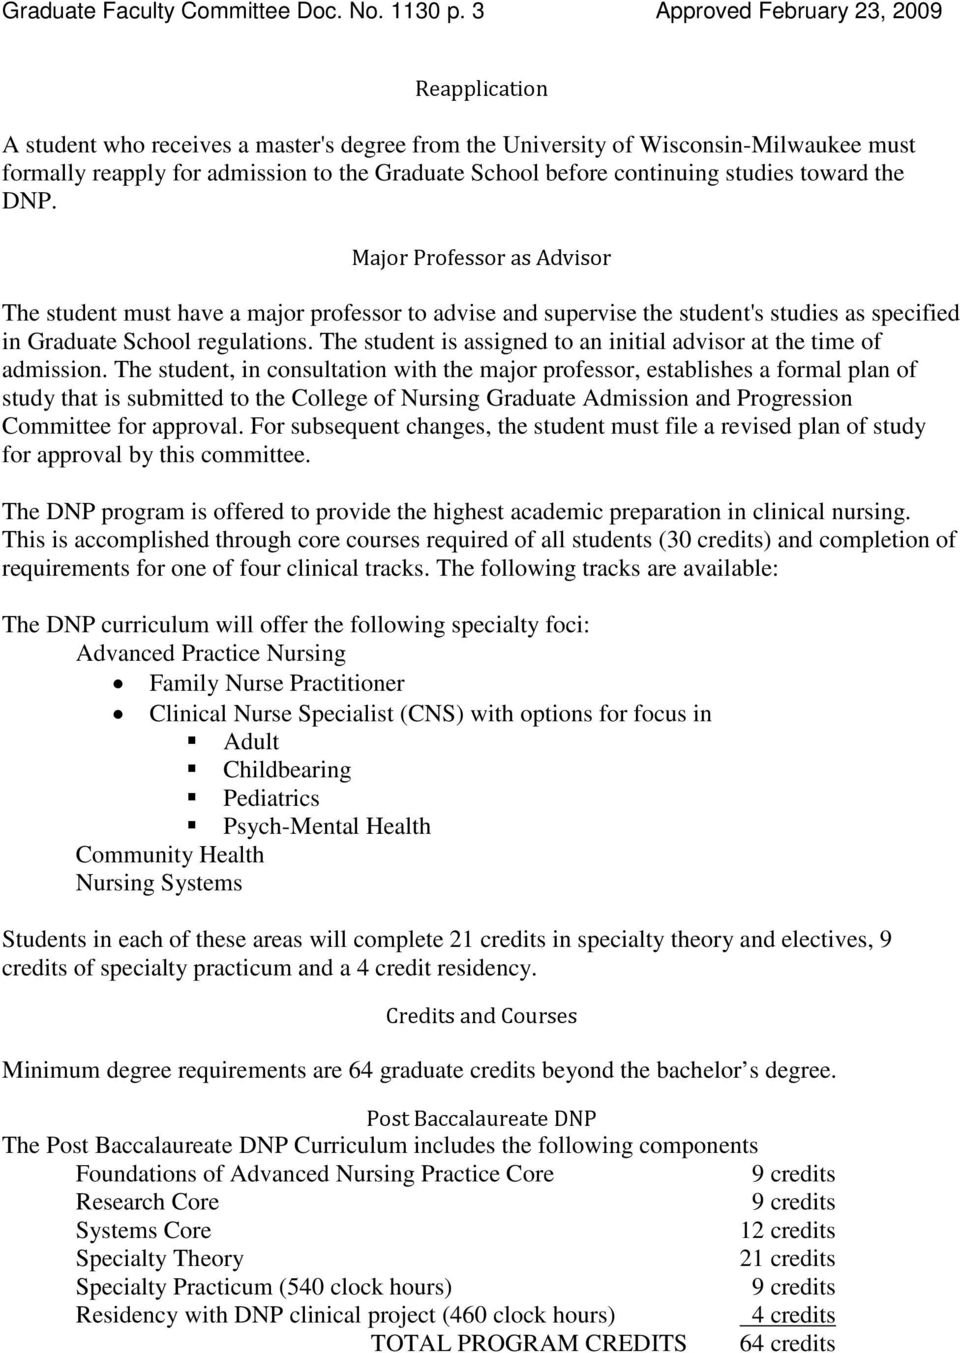 continuing studies toward the DNP. Major Professor as Advisor The student must have a major professor to advise and supervise the student's studies as specified in Graduate School regulations.